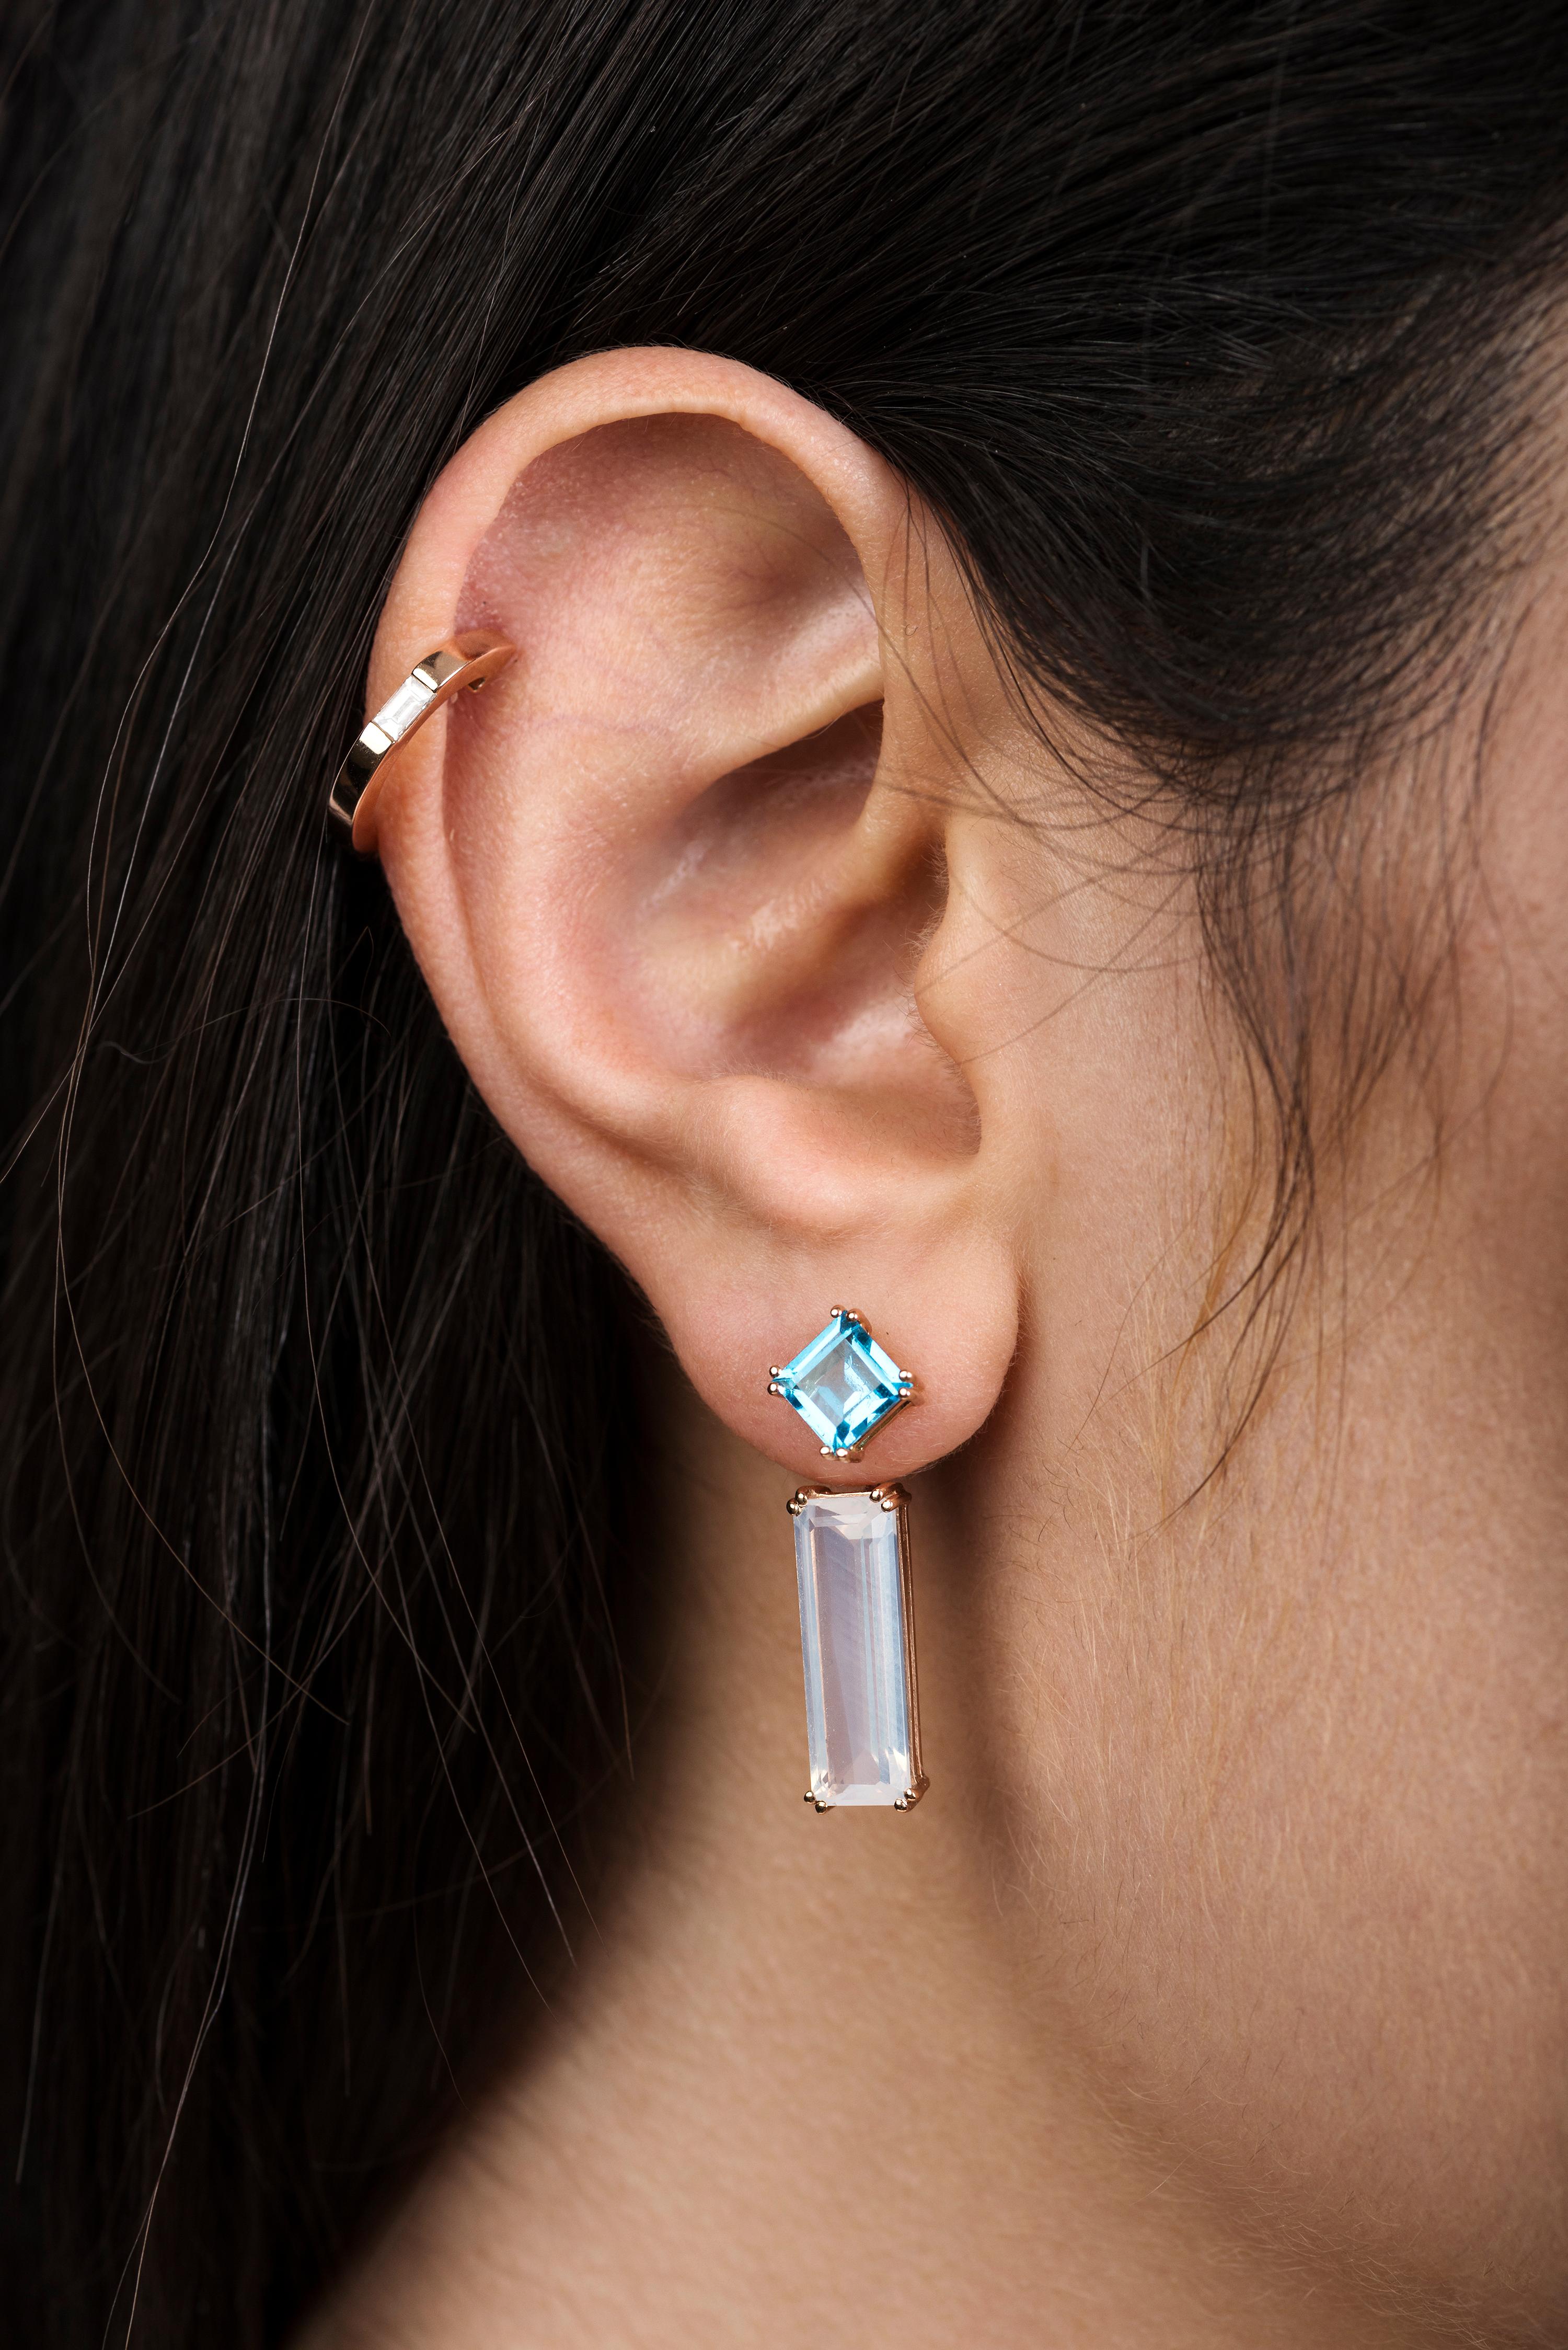 14K Rose Gold Sunflower Quartz Gem Bar Marilyn Earring Extenders. (Extender only, Stud earrings sold separately).
Gold Weight: 3.36 grams.
Quartz Carats: 8.00 ct.
Wear and customize with Neo Classic stud earrings, or with any studs of your